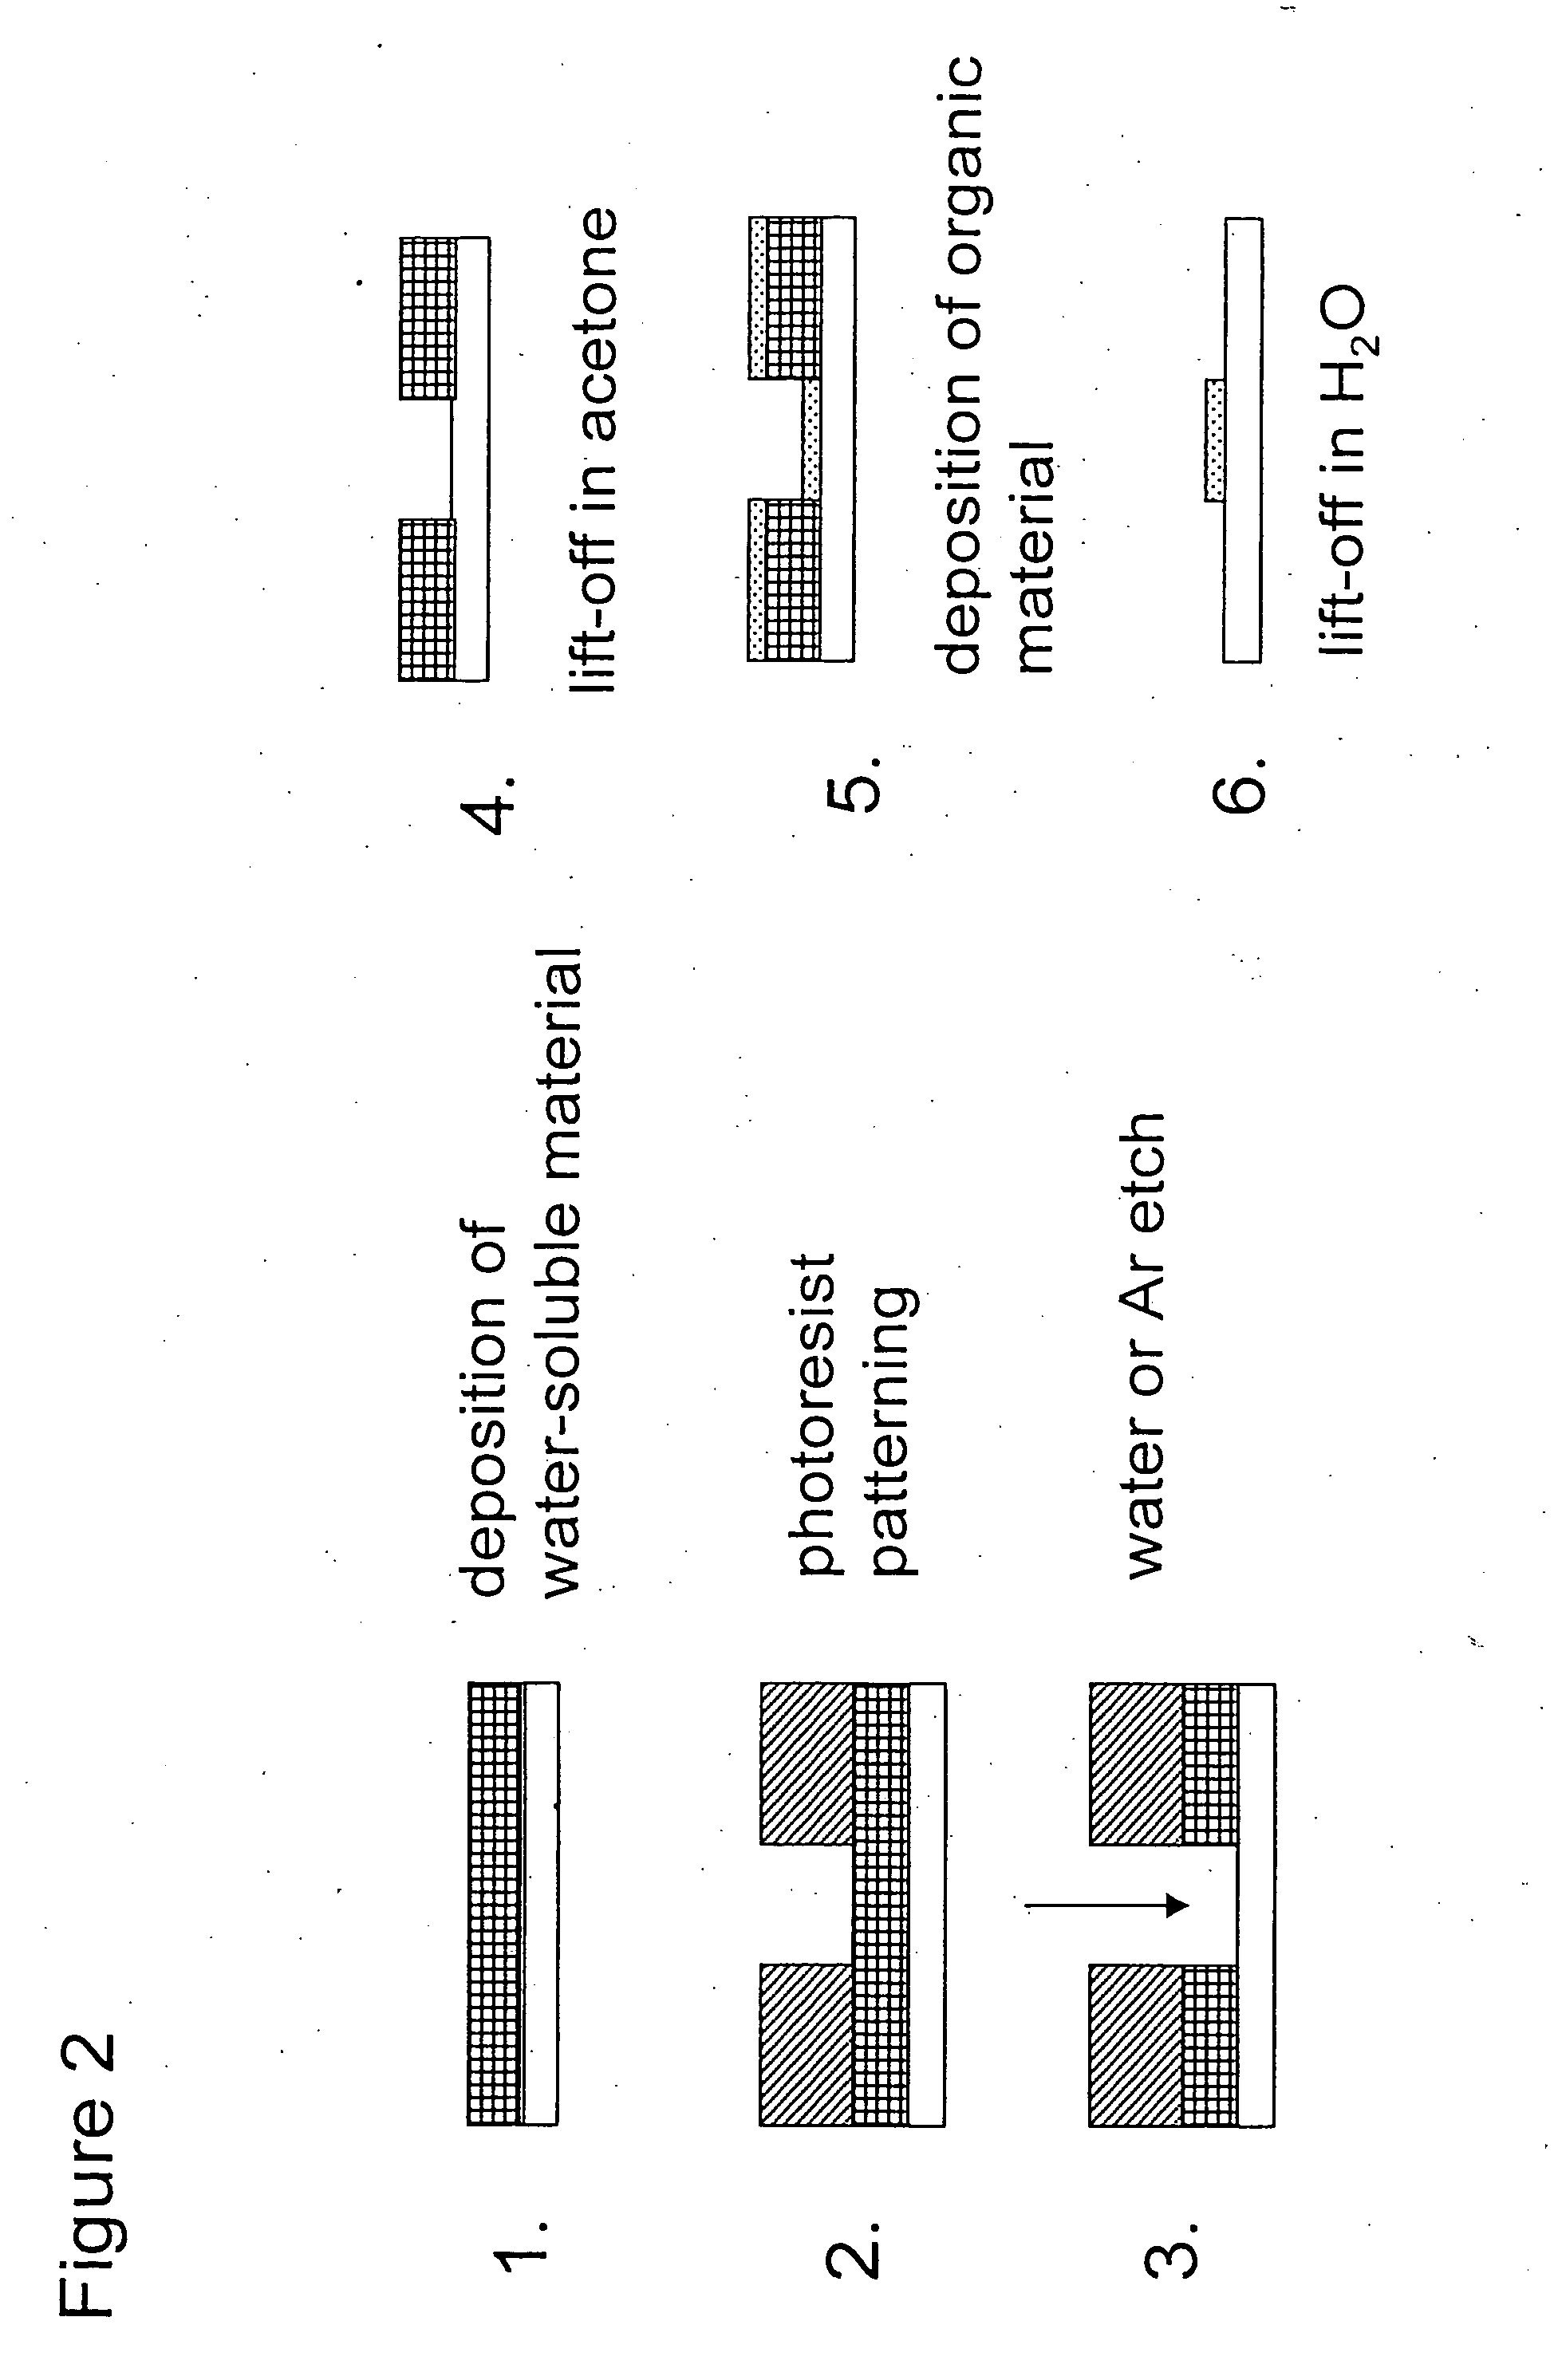 Method for patterning organic materials or combinations of organic and inorganic materials